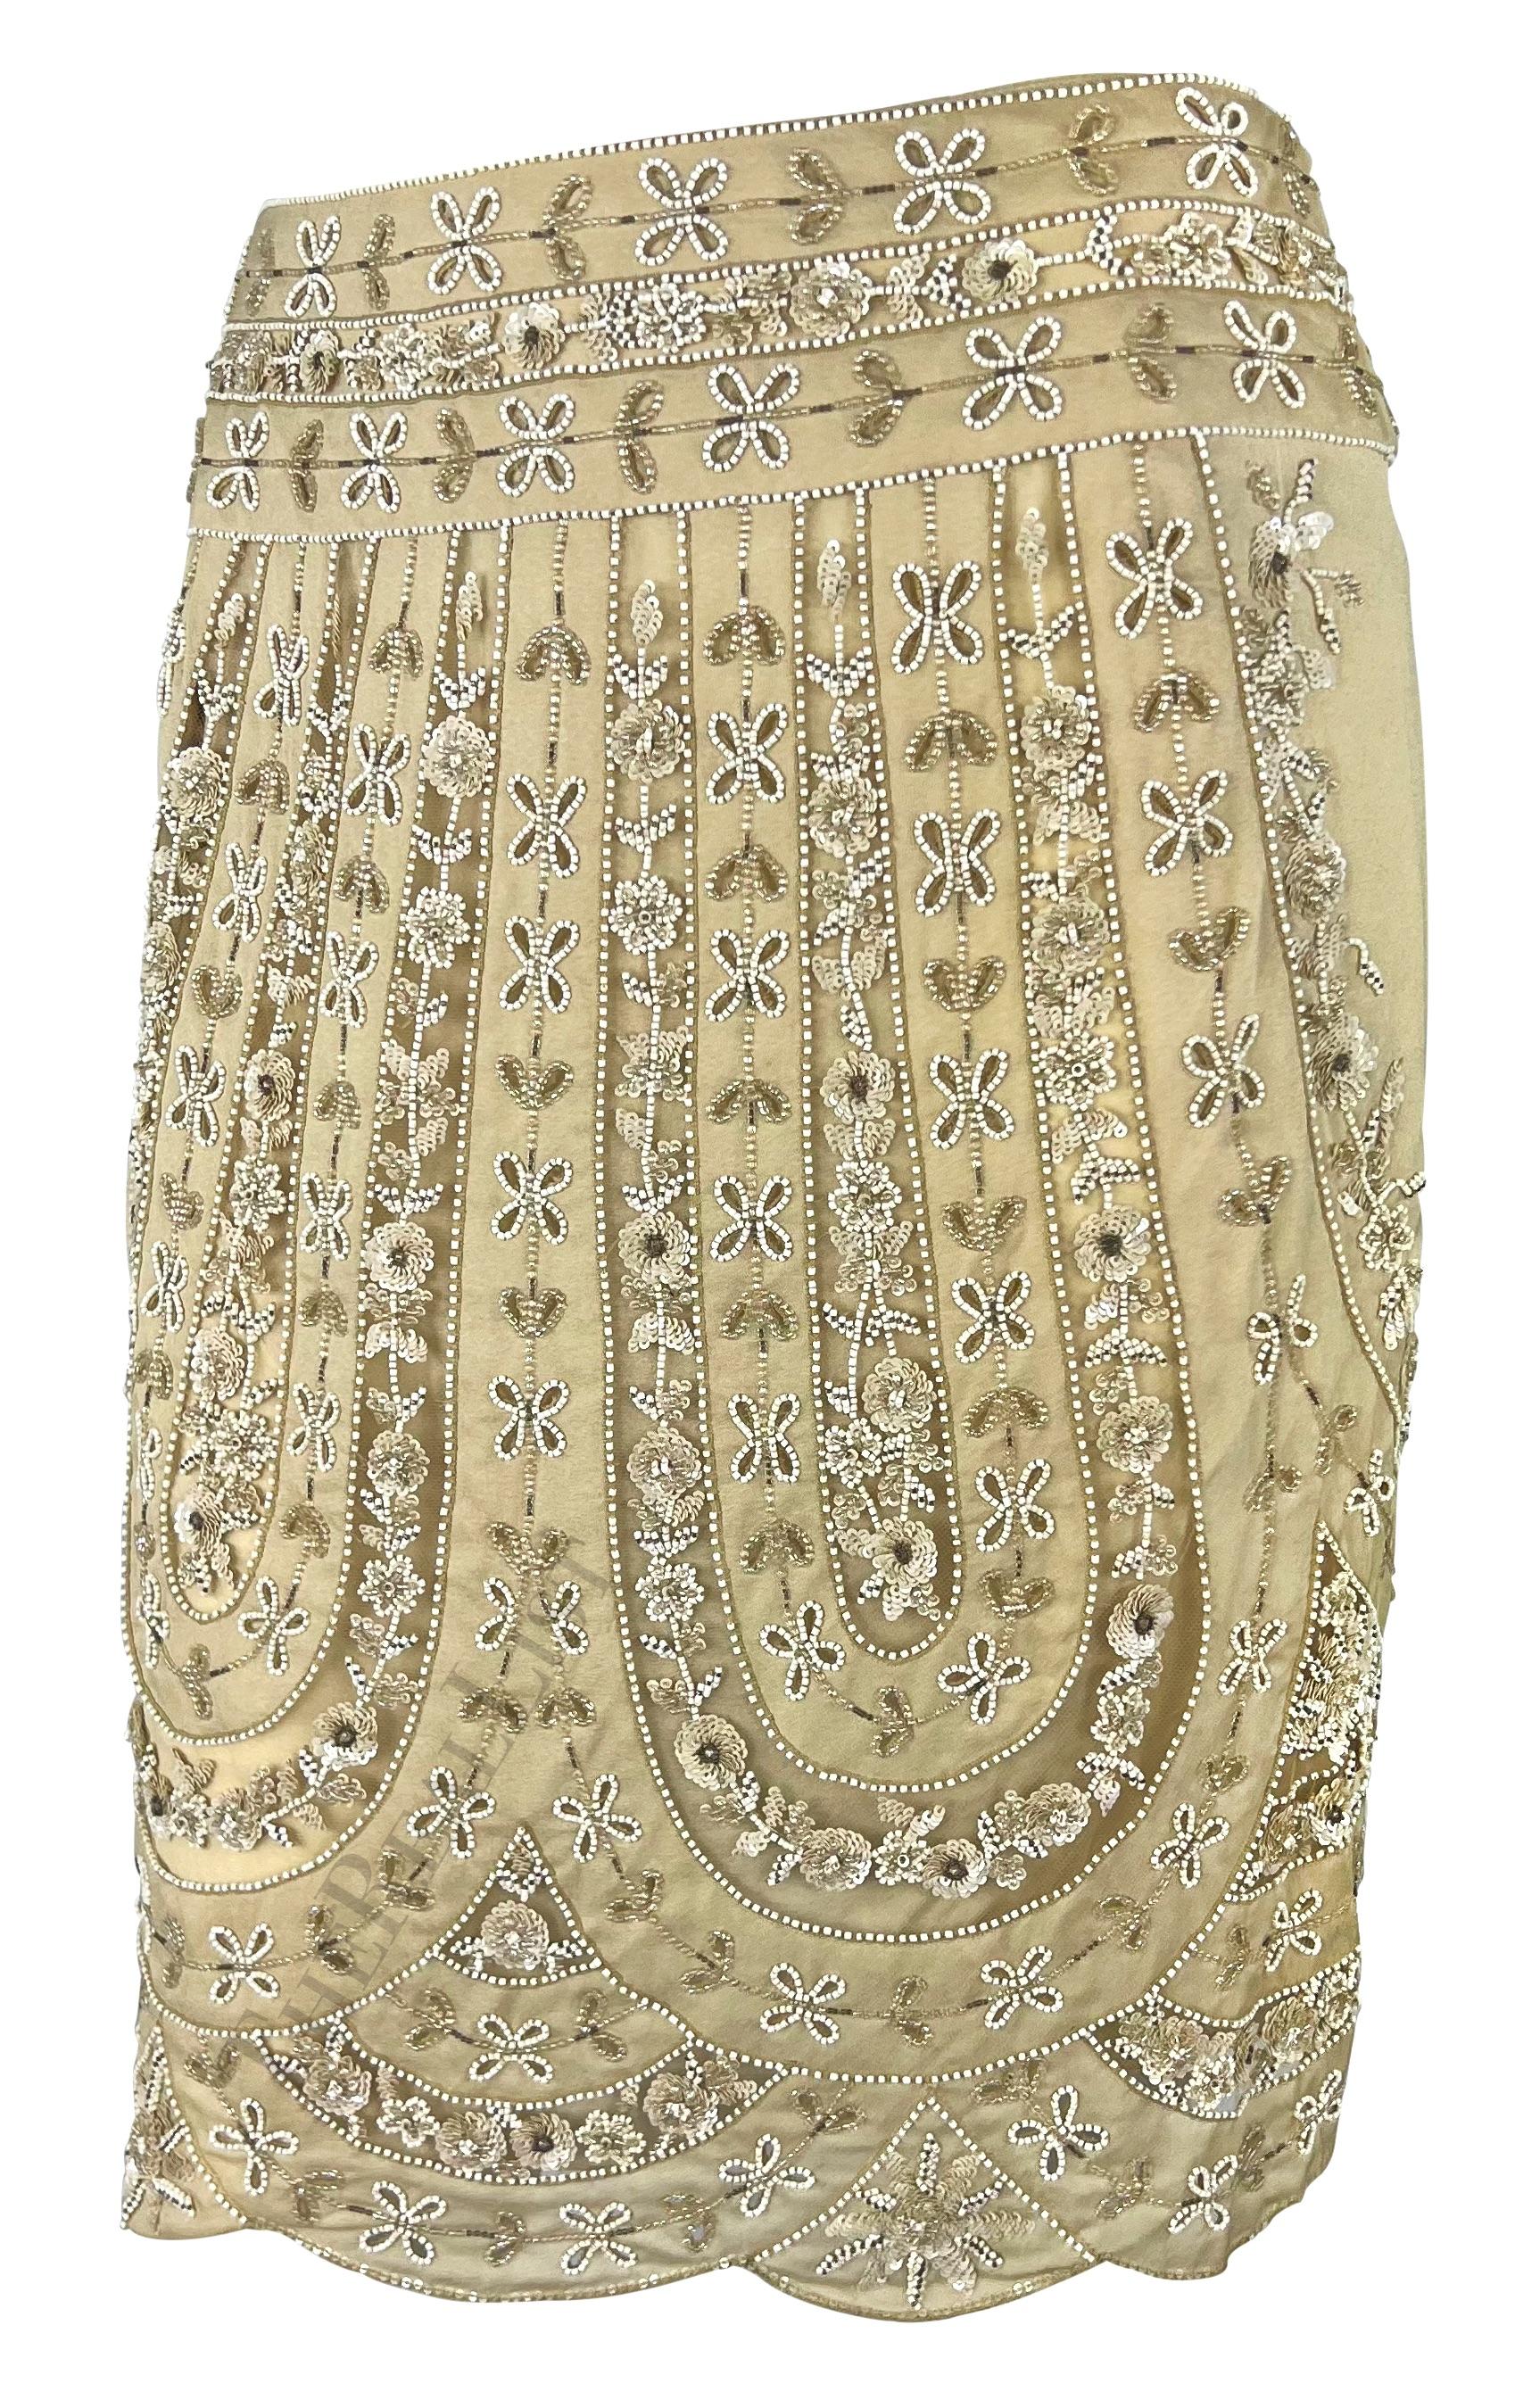 Early 2000s Valentino Garavani Tan Sheer Panel Floral Beaded Skirt In Excellent Condition For Sale In West Hollywood, CA